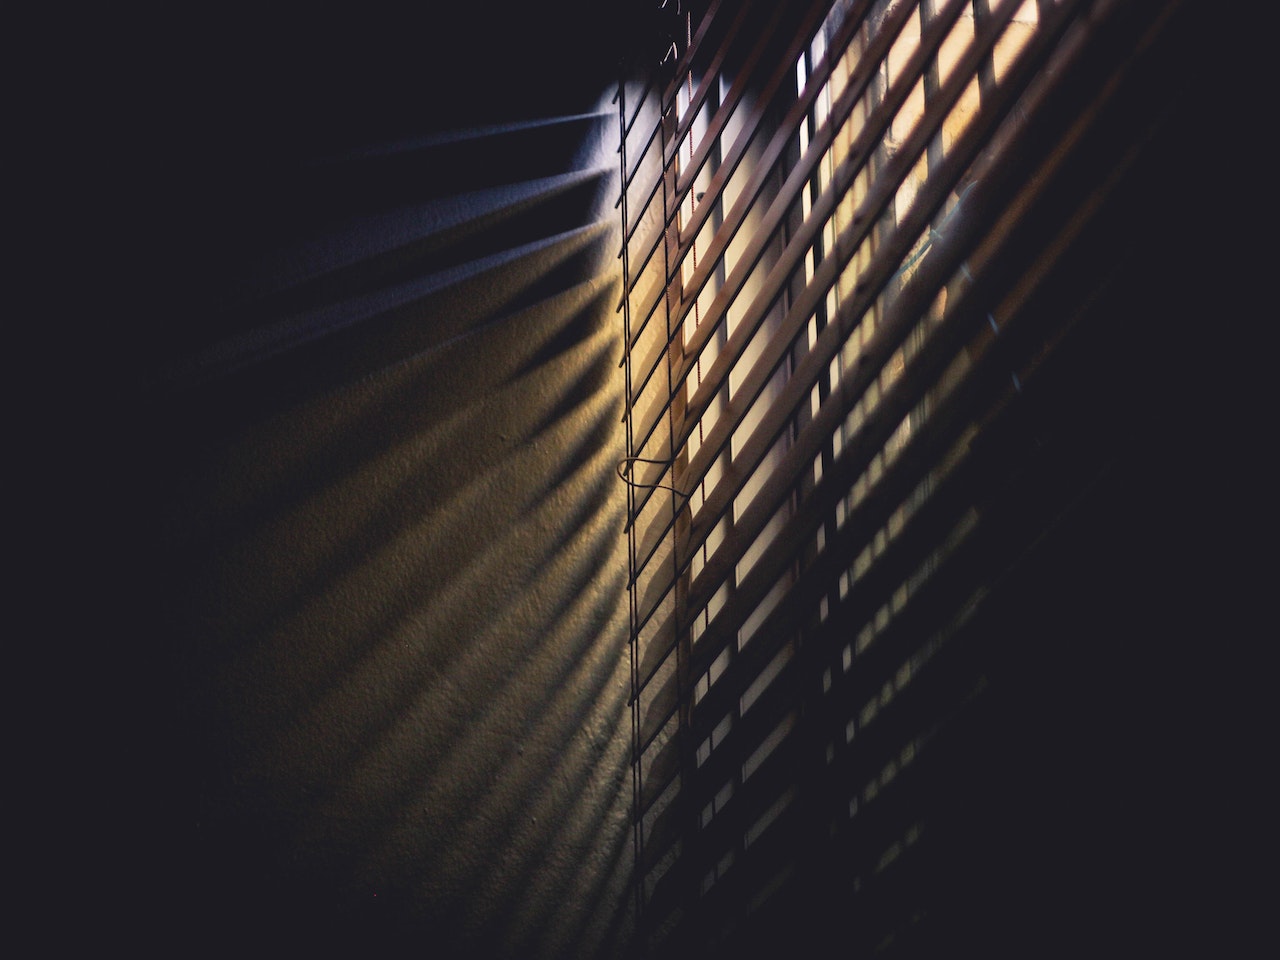 Window Film vs. Blinds: Which Is the Better Choice for Your Home?